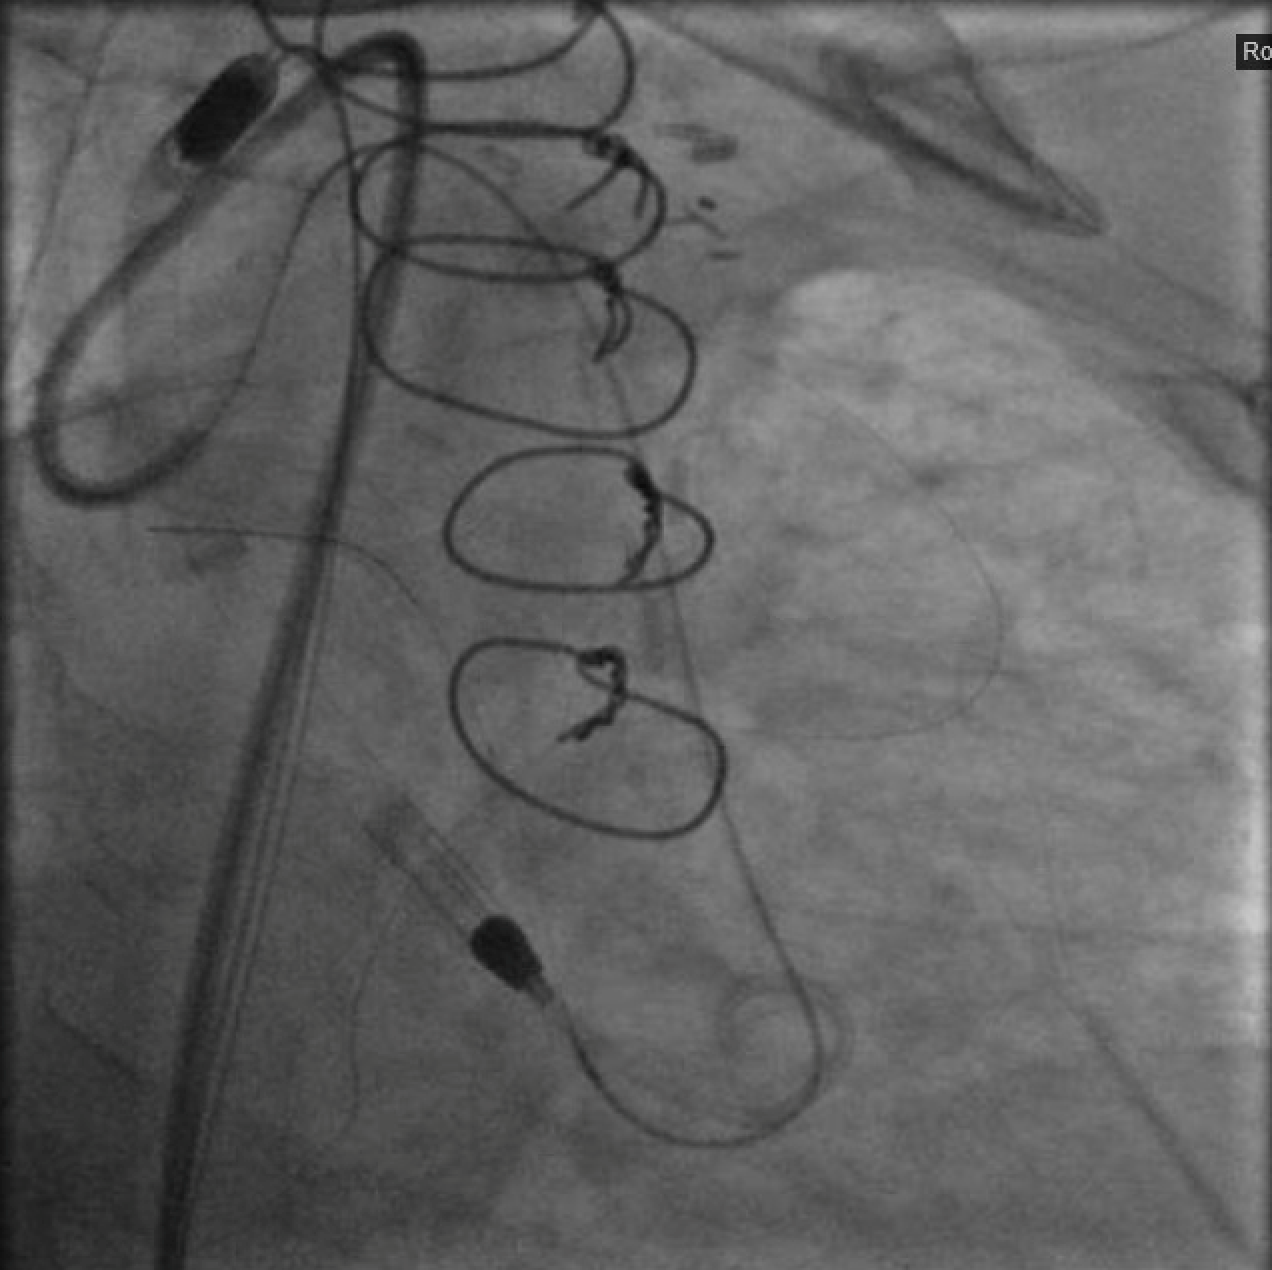 Figure 3. Crossing the left main CTO from the retrograde approach with a Pilot 200 wire supported by a Corsair microcatheter (currently being withdrawn).